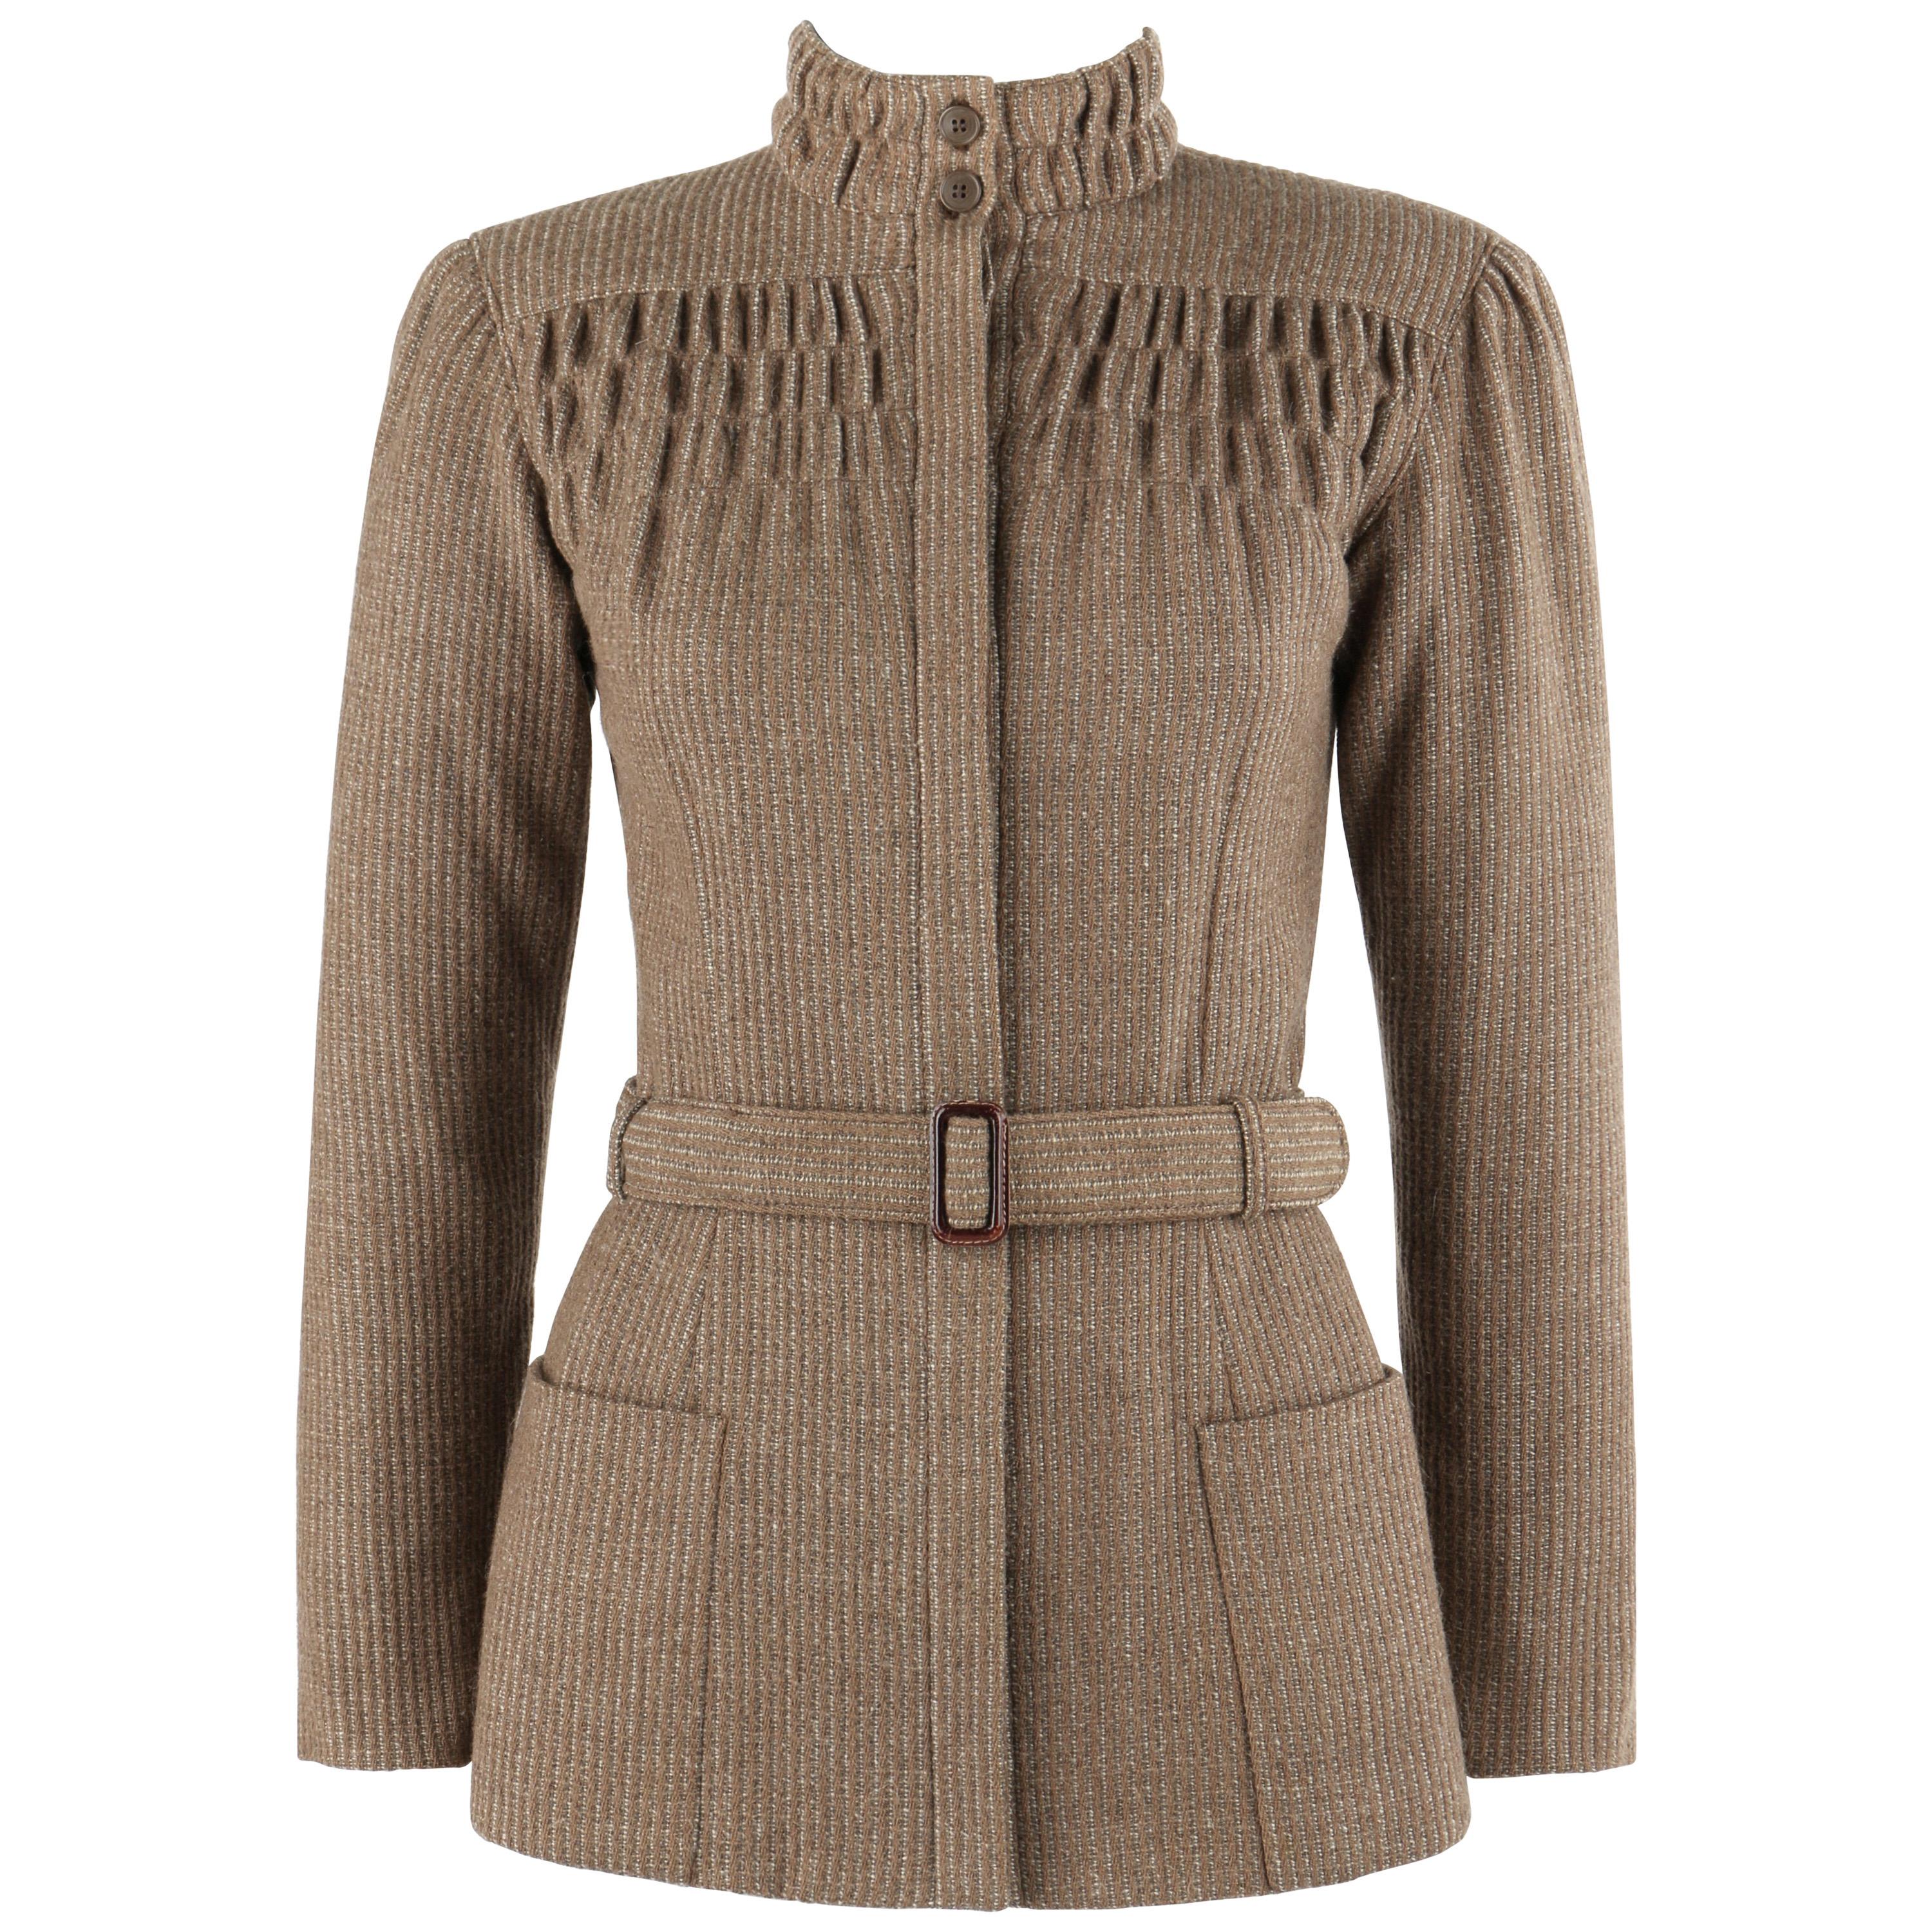 GIORGIO ARMANI c.1980’s Light Brown Tweed Belted Ruched High Neck Jacket  For Sale